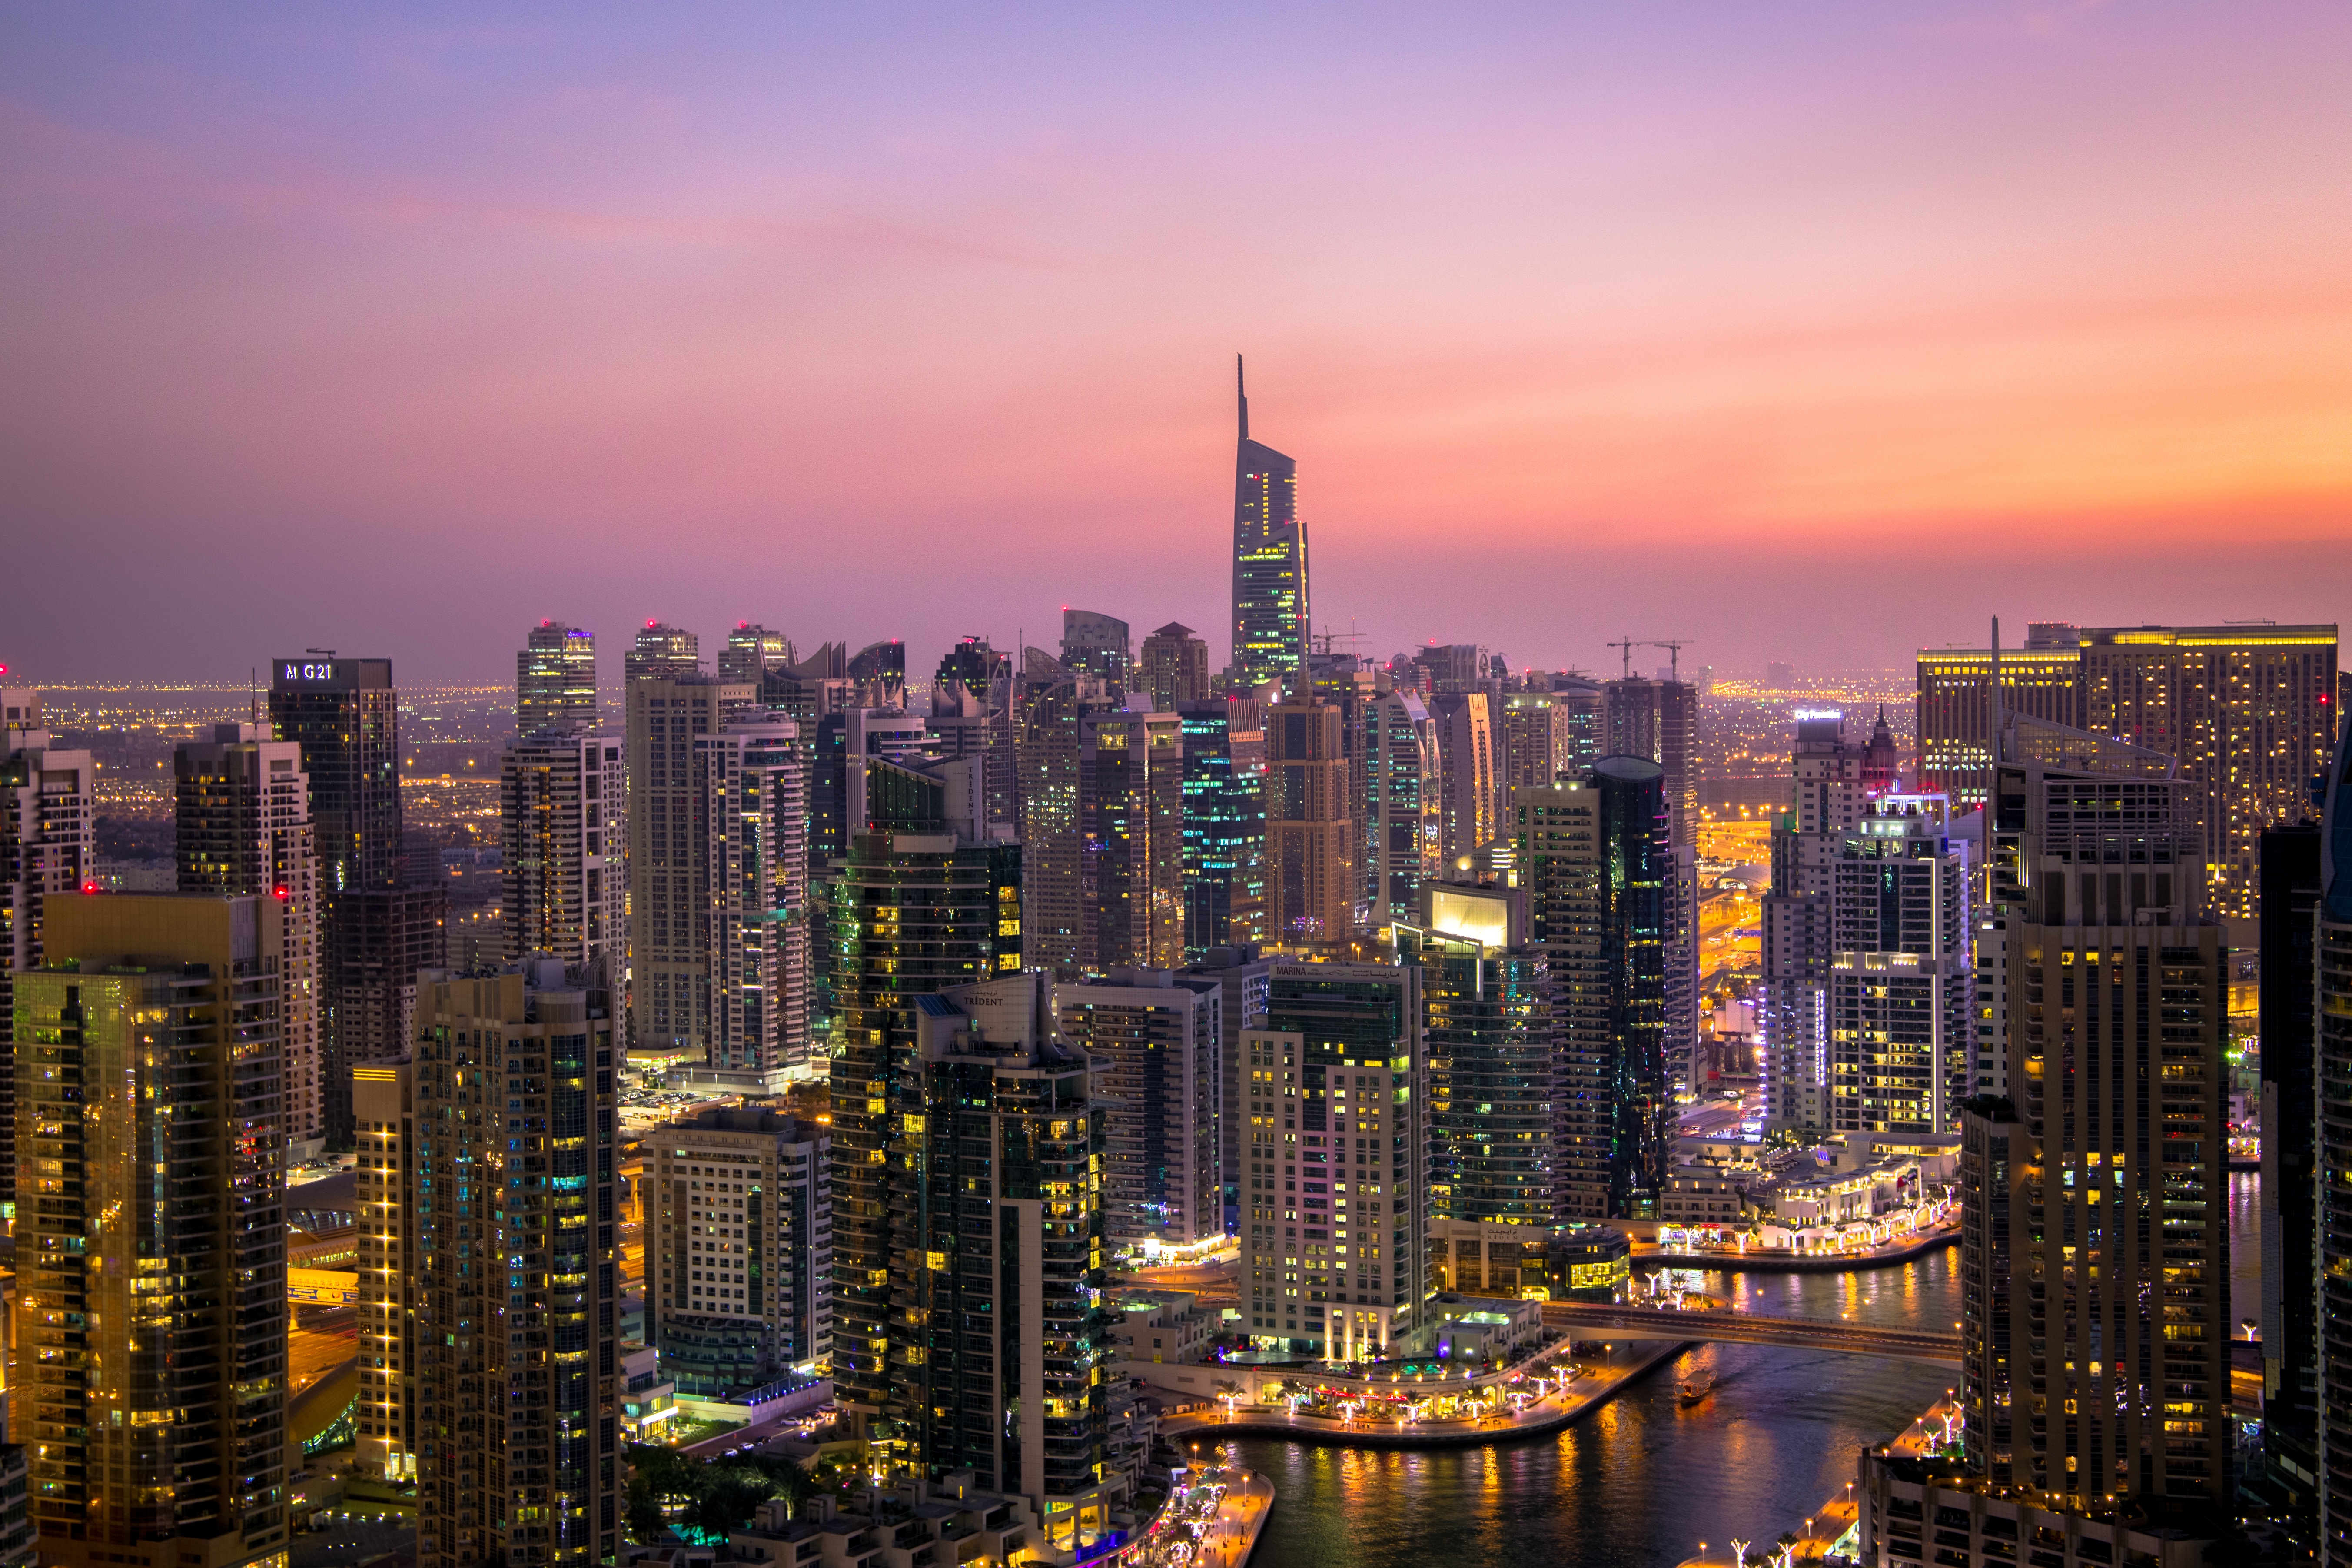 New video shows Dubai devoid of life - Esquire Middle East